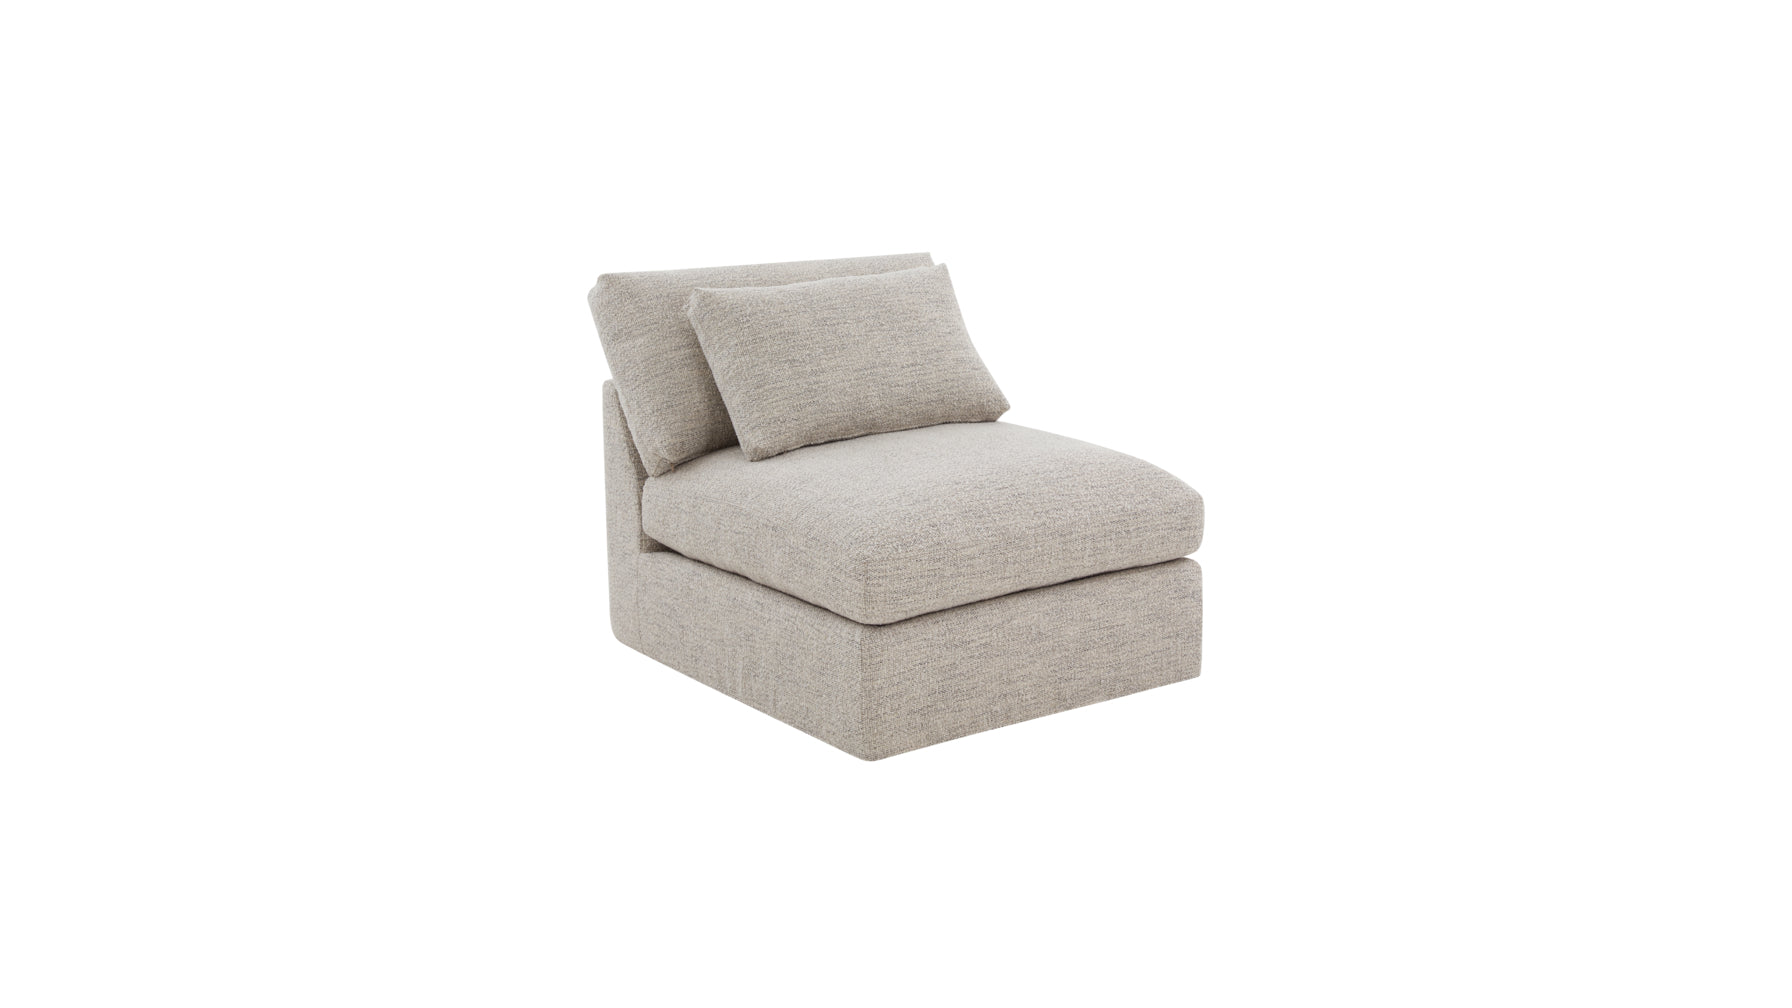 Get Together™ Armless Chair, Large, Oatmeal - Image 3